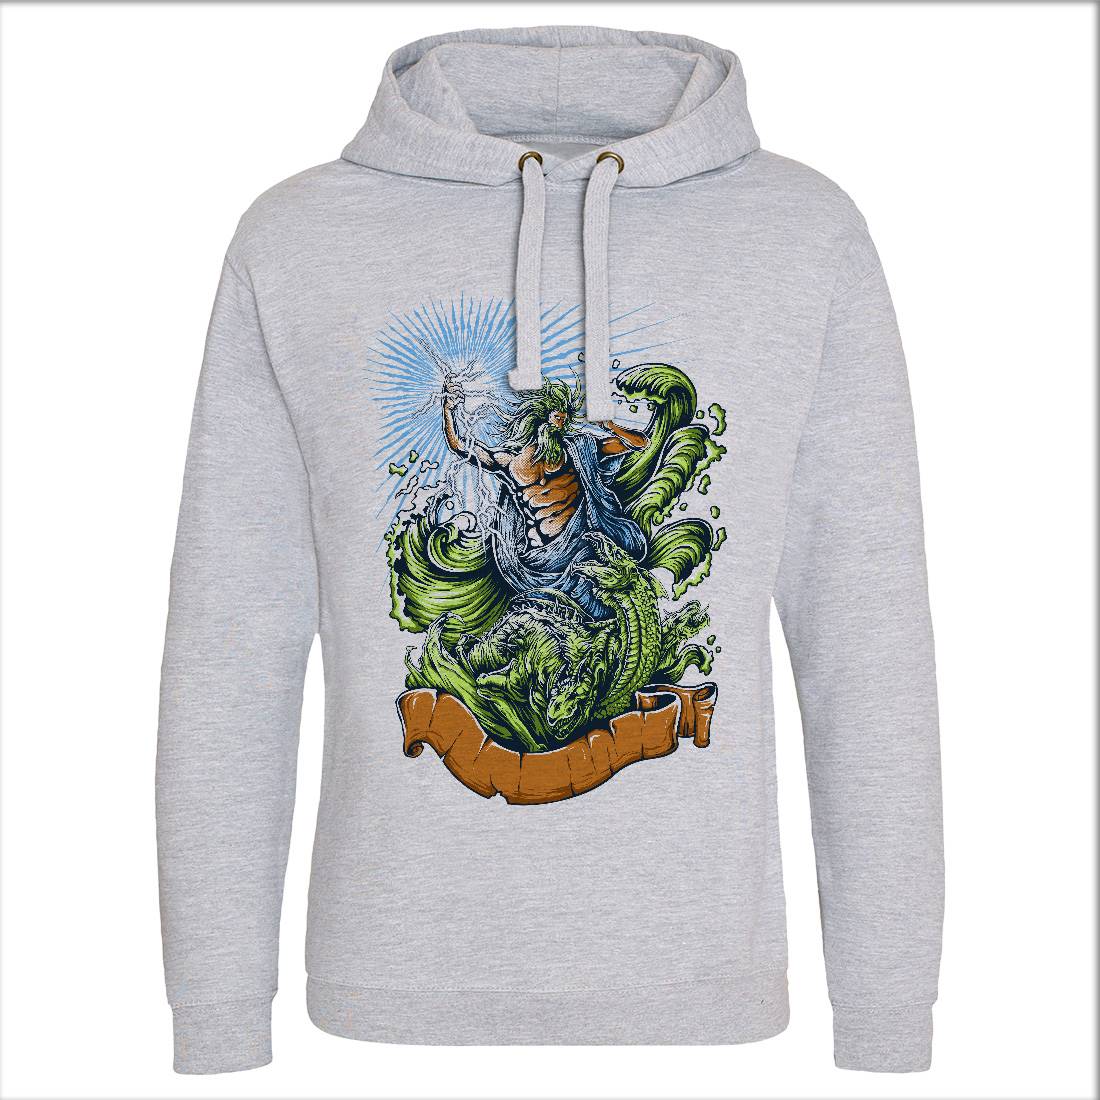 Poseidon Mens Hoodie Without Pocket Navy D067